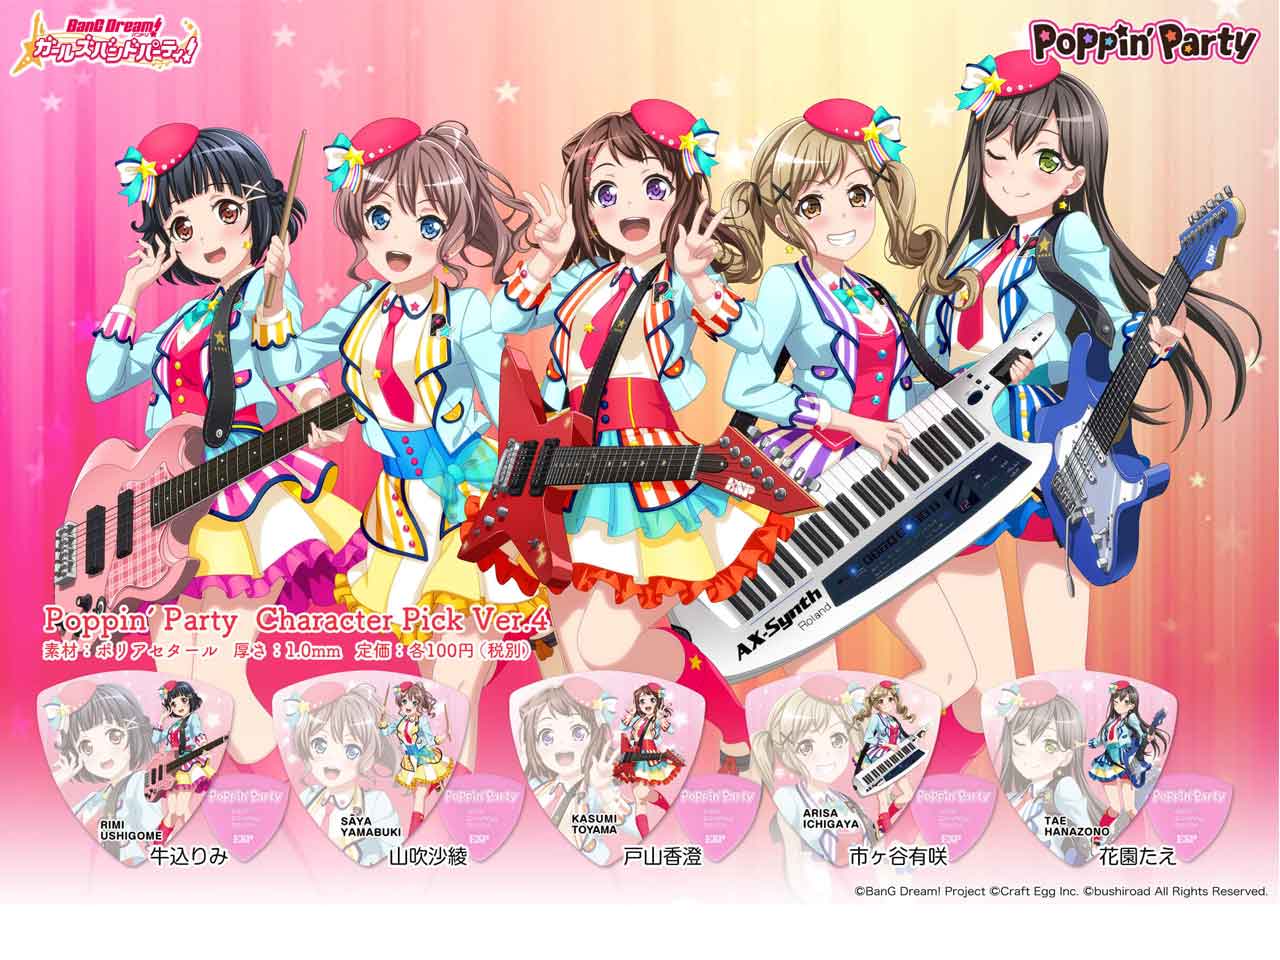 【ESP×BanG Dream!コラボピック】Poppin’Party Character Pick Ver.4 "牛込りみ"（GBP Rimi Poppin Party 4）＆”ハメパチ” セット